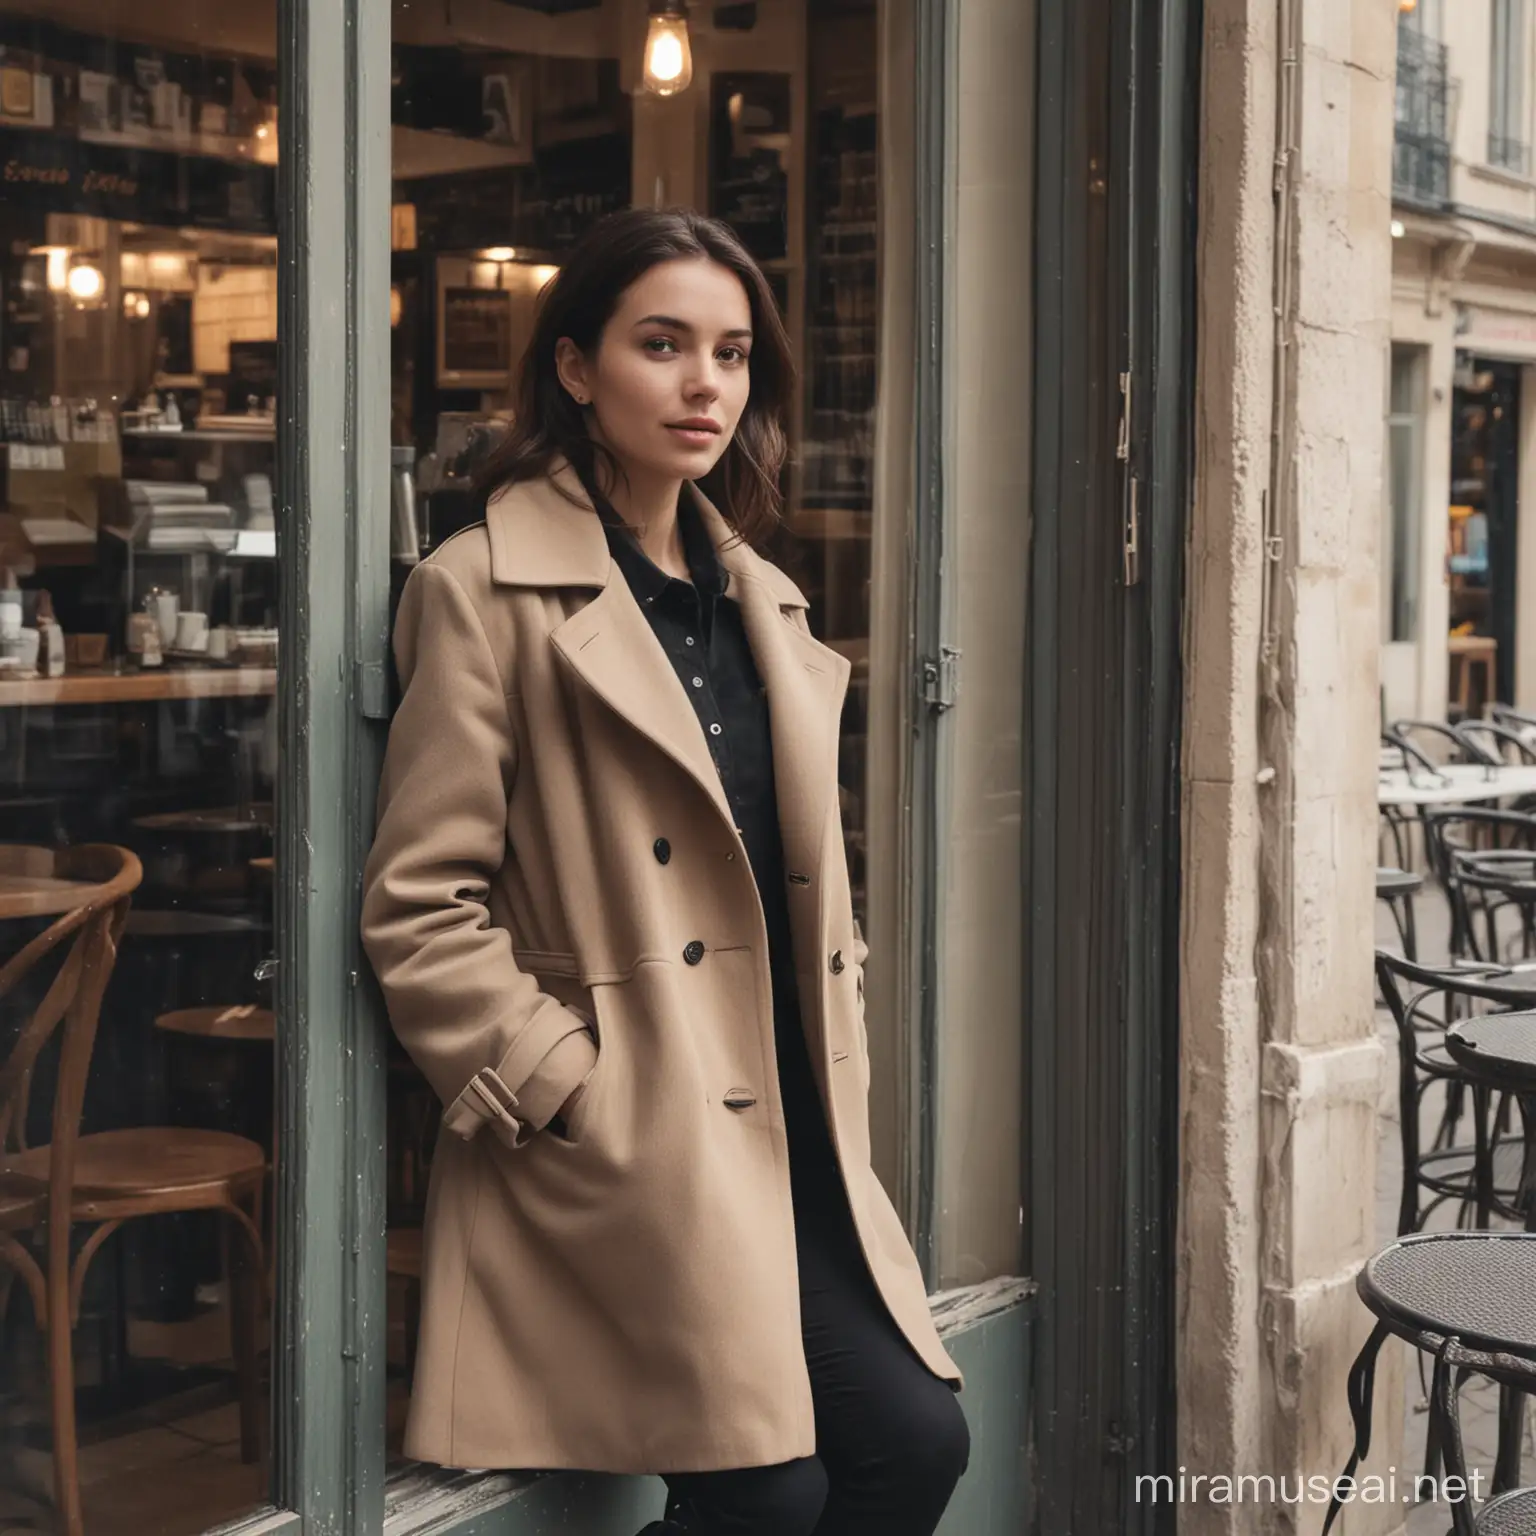 Elegant Woman Contemplating in a Cozy French Caf with Hands in Pockets